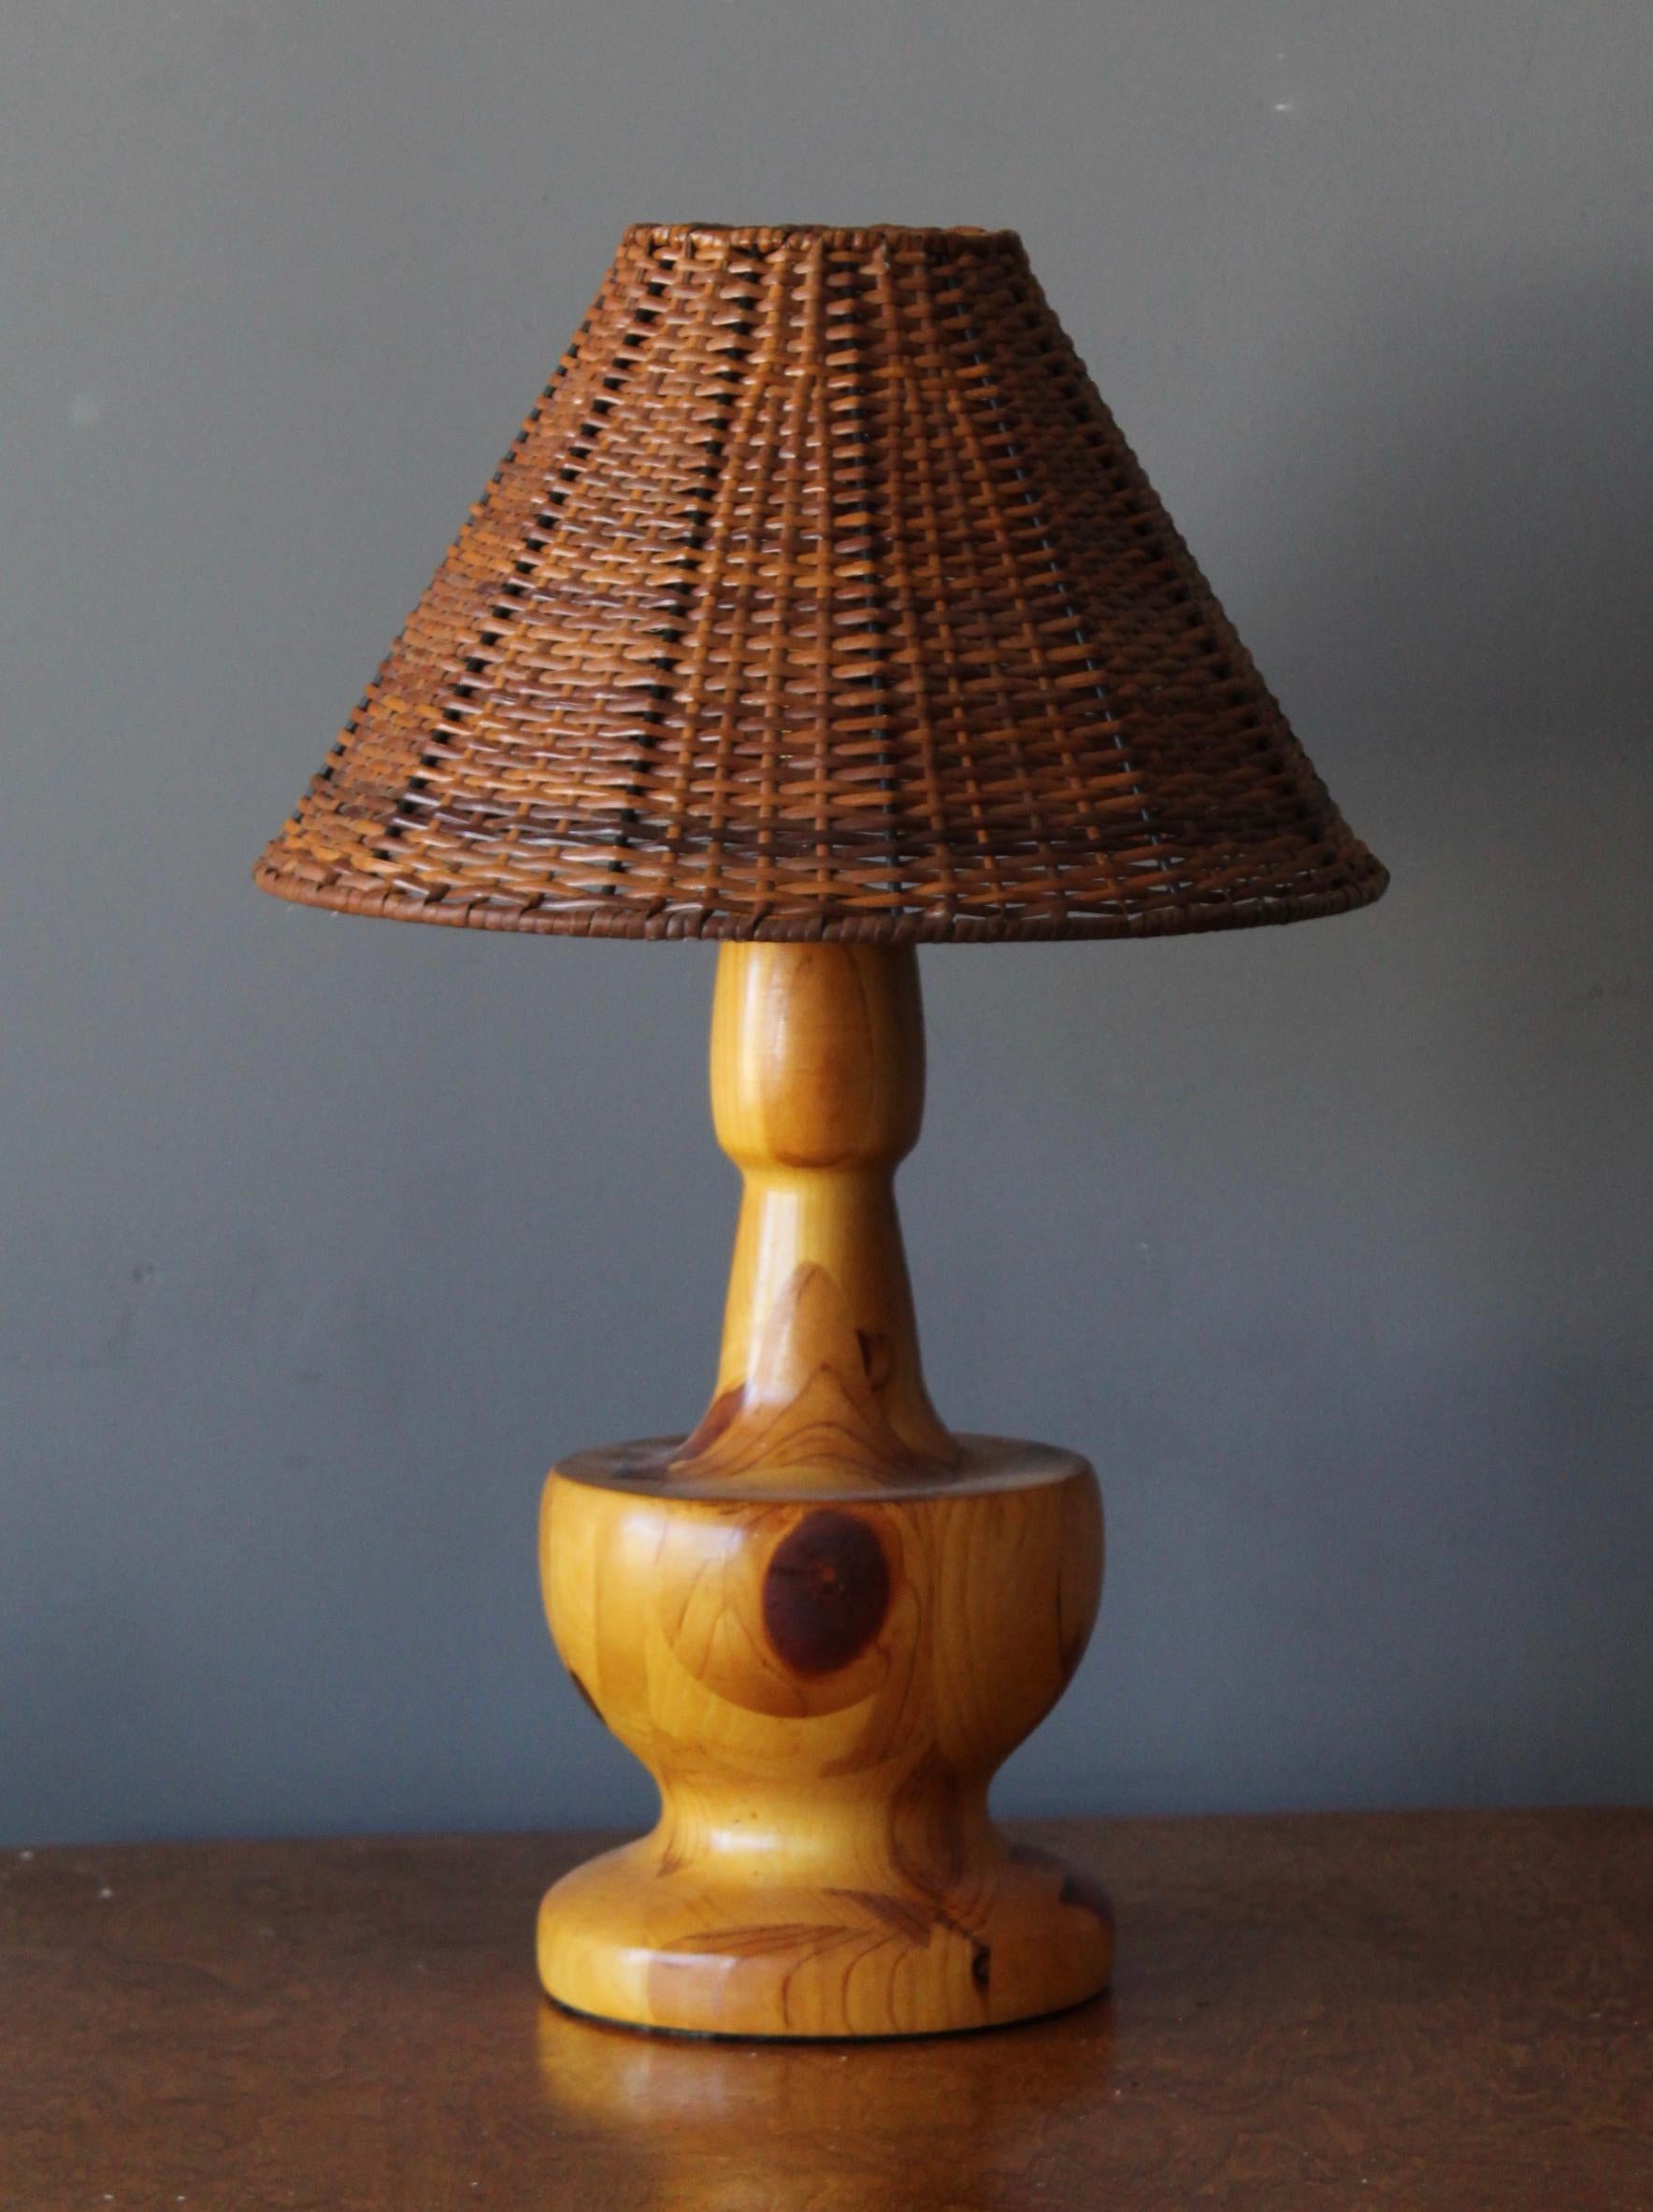 A large table lamp. In turned solid pine. By unknown studio craftsman. With assorted vintage rattan lampshade.

Stated dimensions include lampshade.

Other designers of the period include Alexandre Knoll, George Nakashima, Isamu Noguchi, J.B.